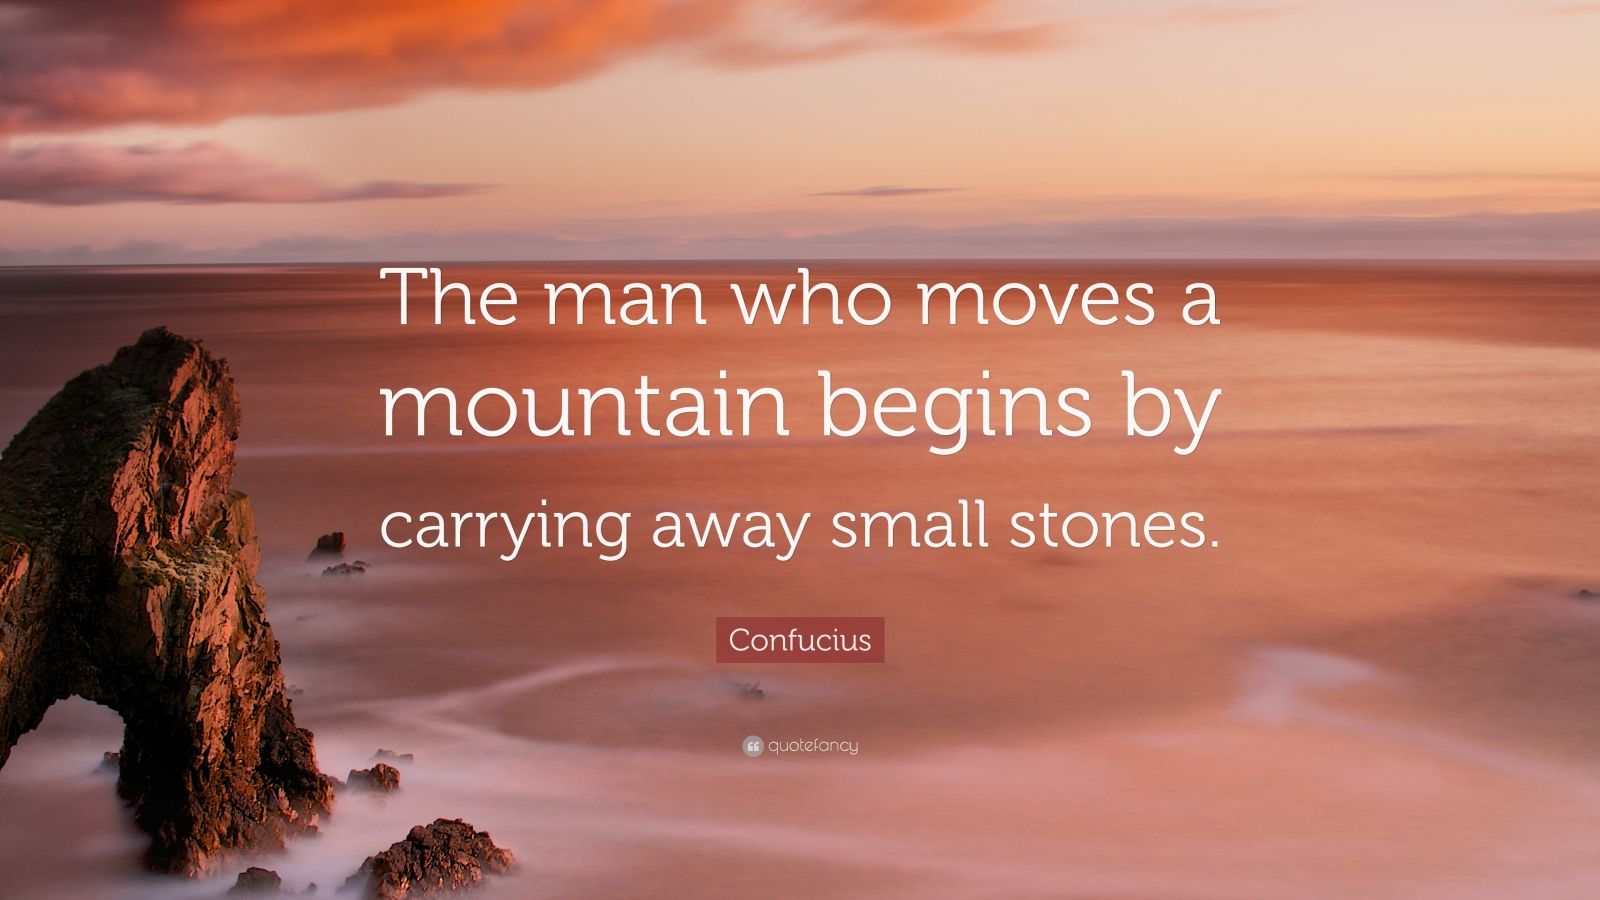 4677282 Confucius Quote The man who moves a mountain begins by carrying